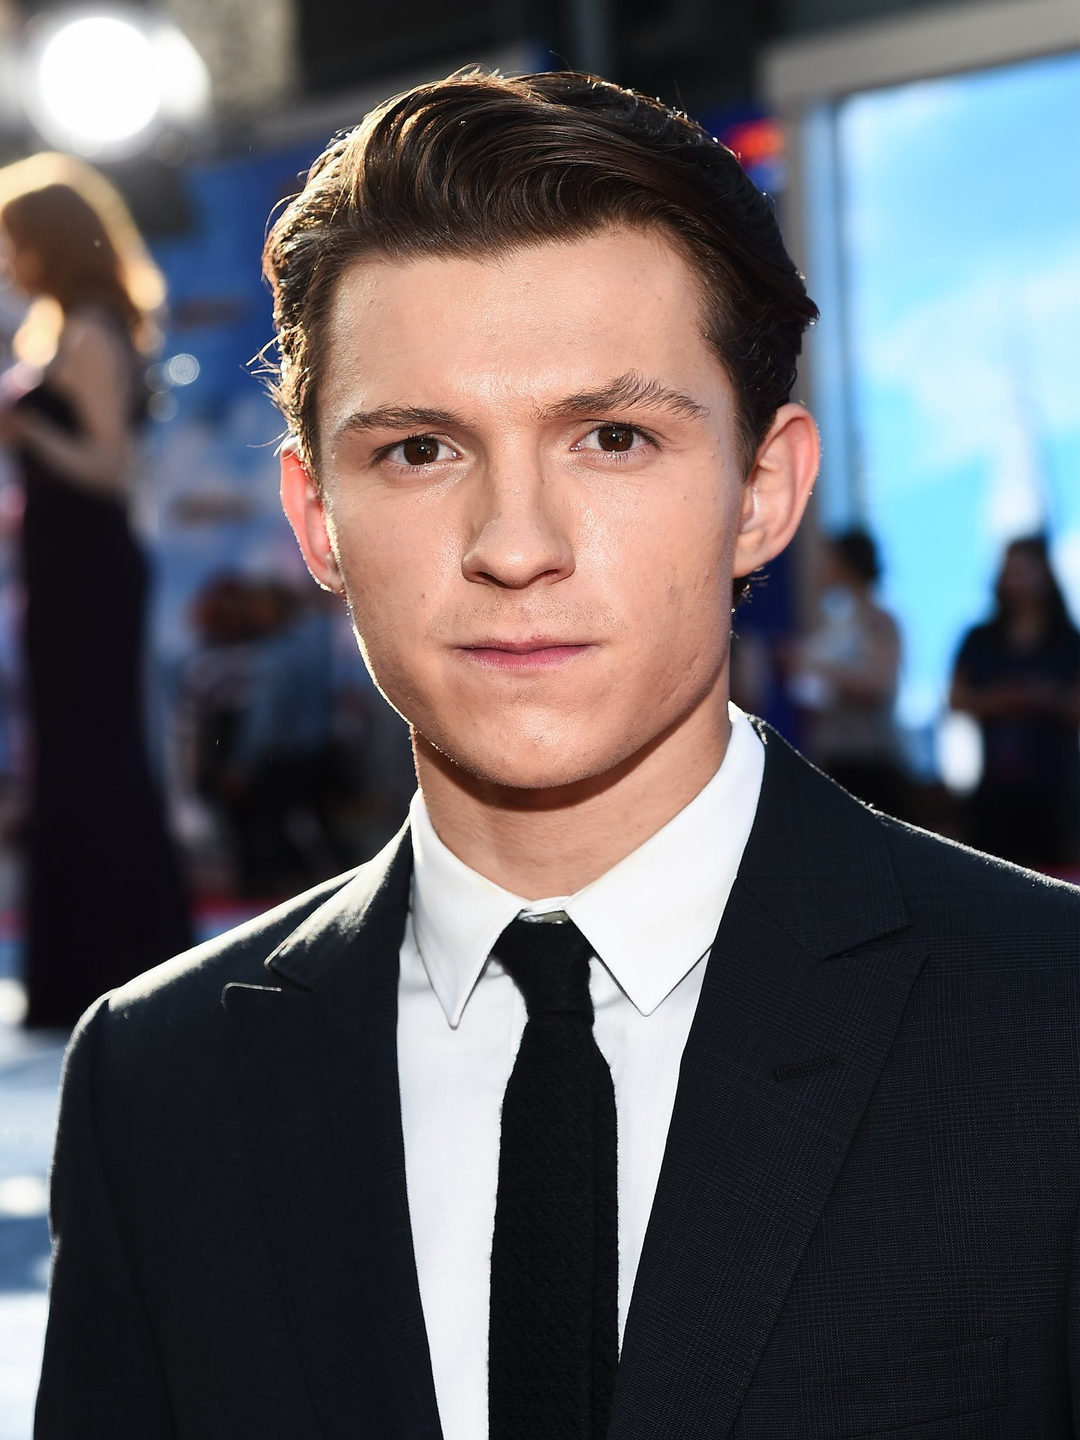 Tom Holland in real life